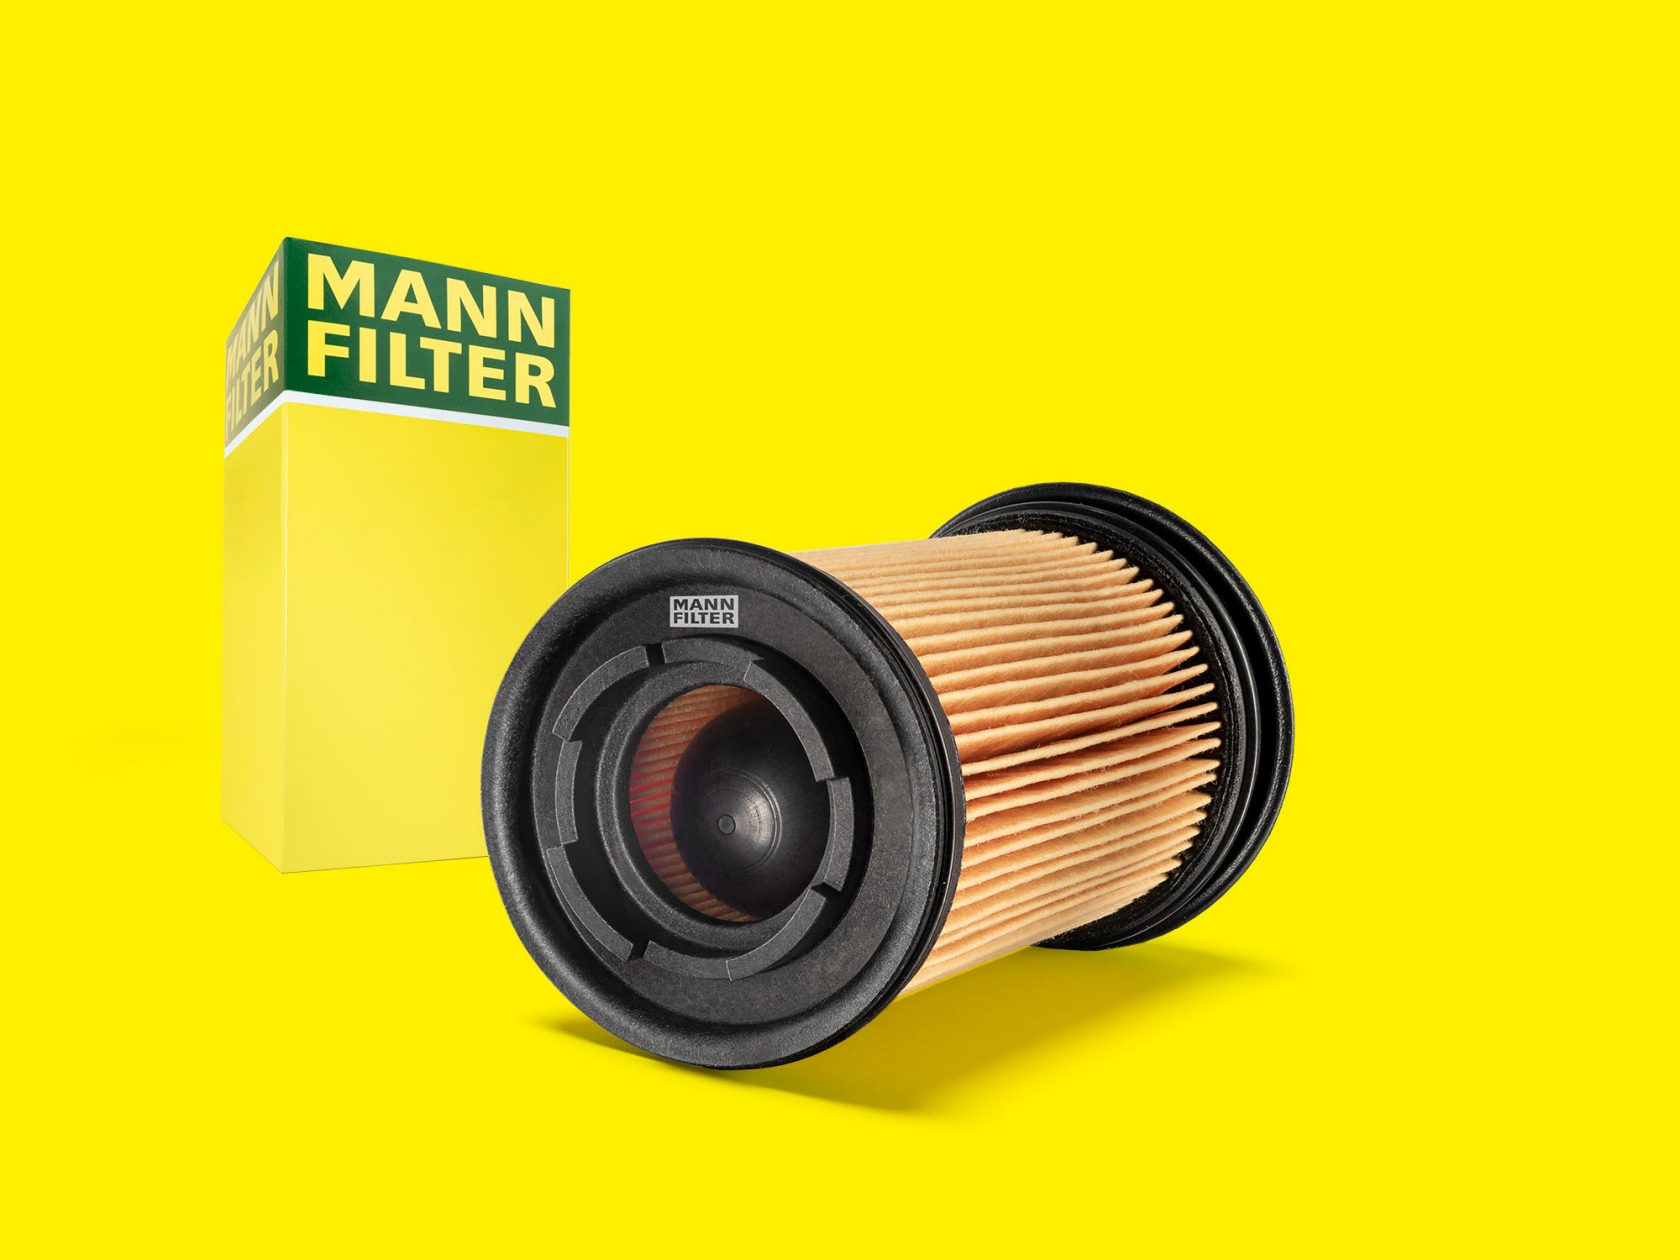 MANN-FILTER Urea filters protect sensitive injection nozzles and system components from wear